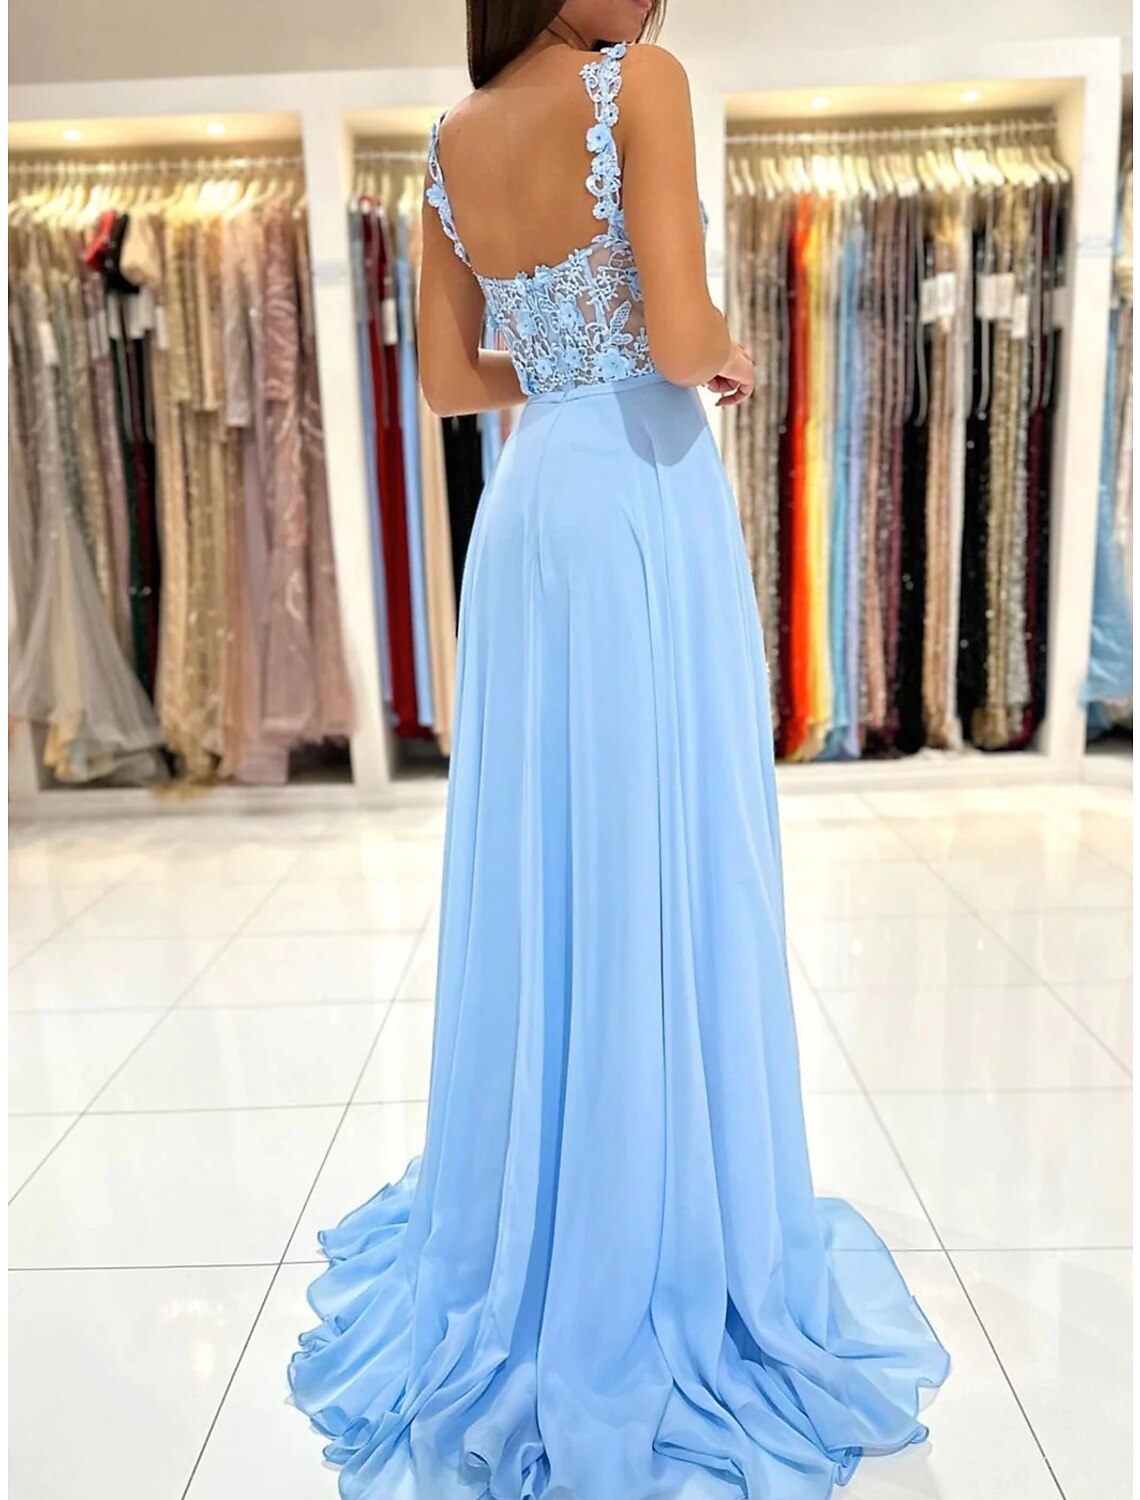 A-Line Prom Dresses Empire Dress Formal Prom Court Train Sleeveless Spaghetti Strap Chiffon Backless with Appliques